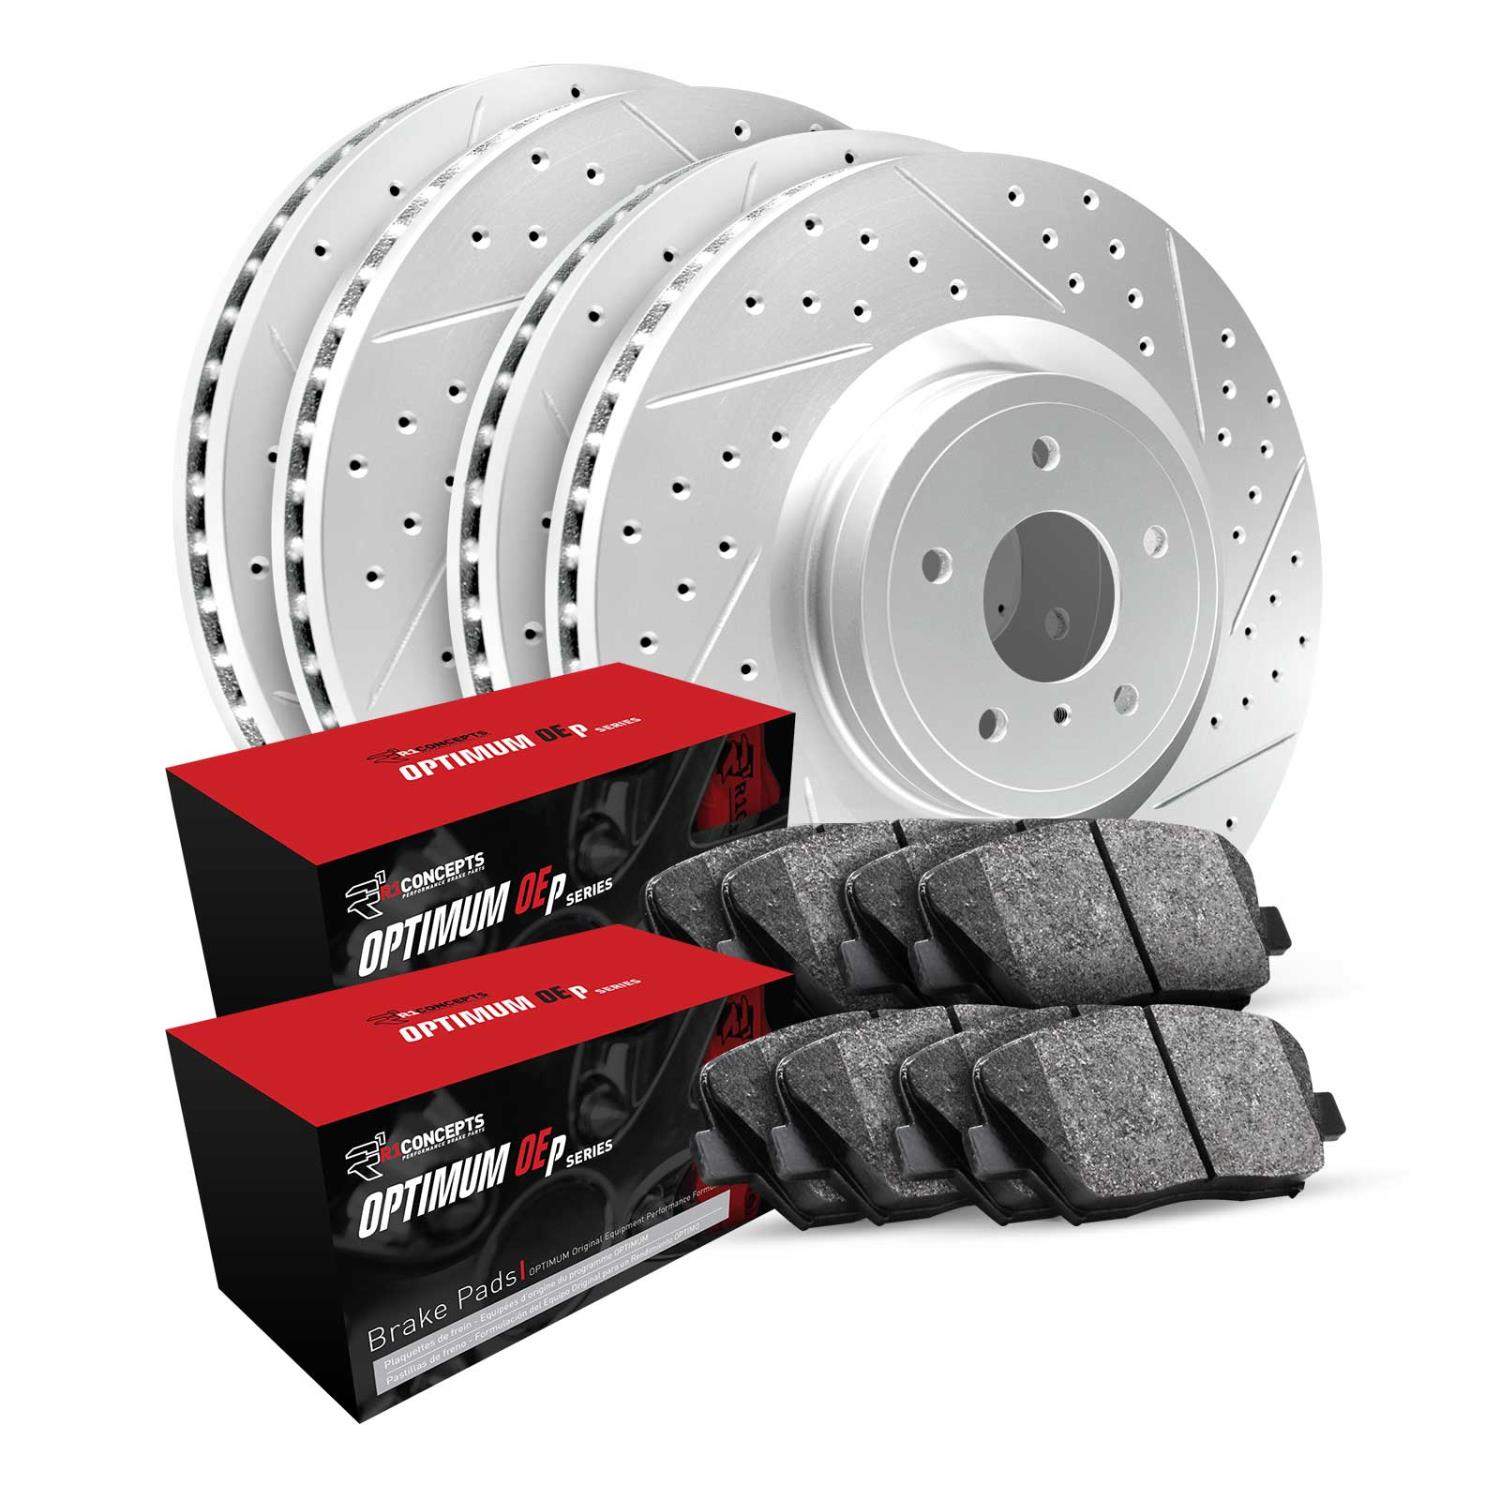 GEO-Carbon Brake Rotor Set w/Optimum OE Pads, Fits Select Fits Multiple Makes/Models, Position: Front & Rear